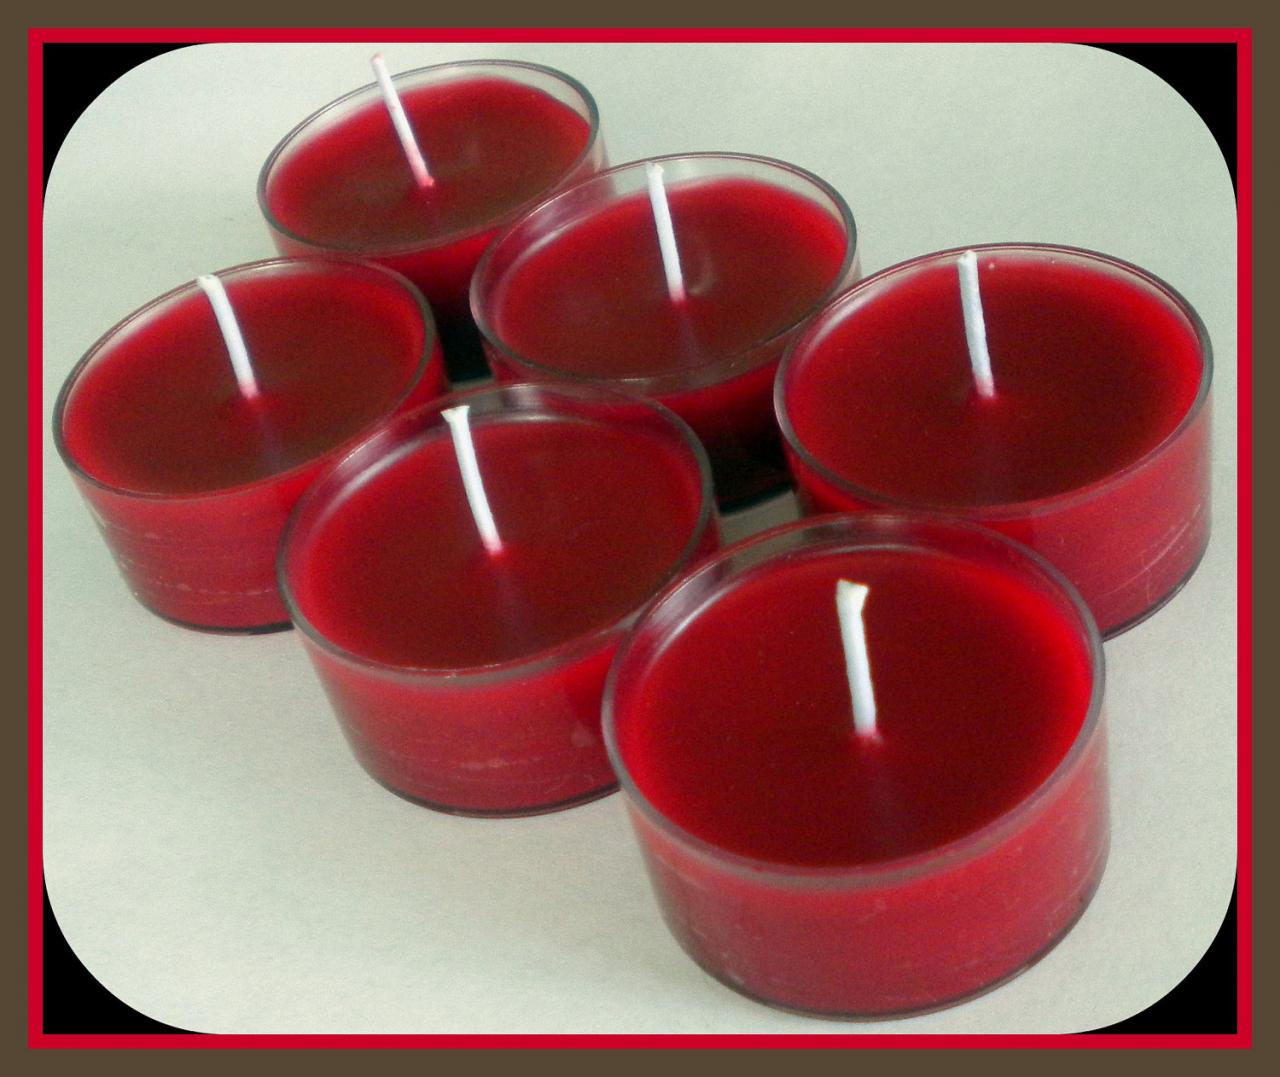 Tealight Candles - Soy - Set Of 6 - Pomegranate